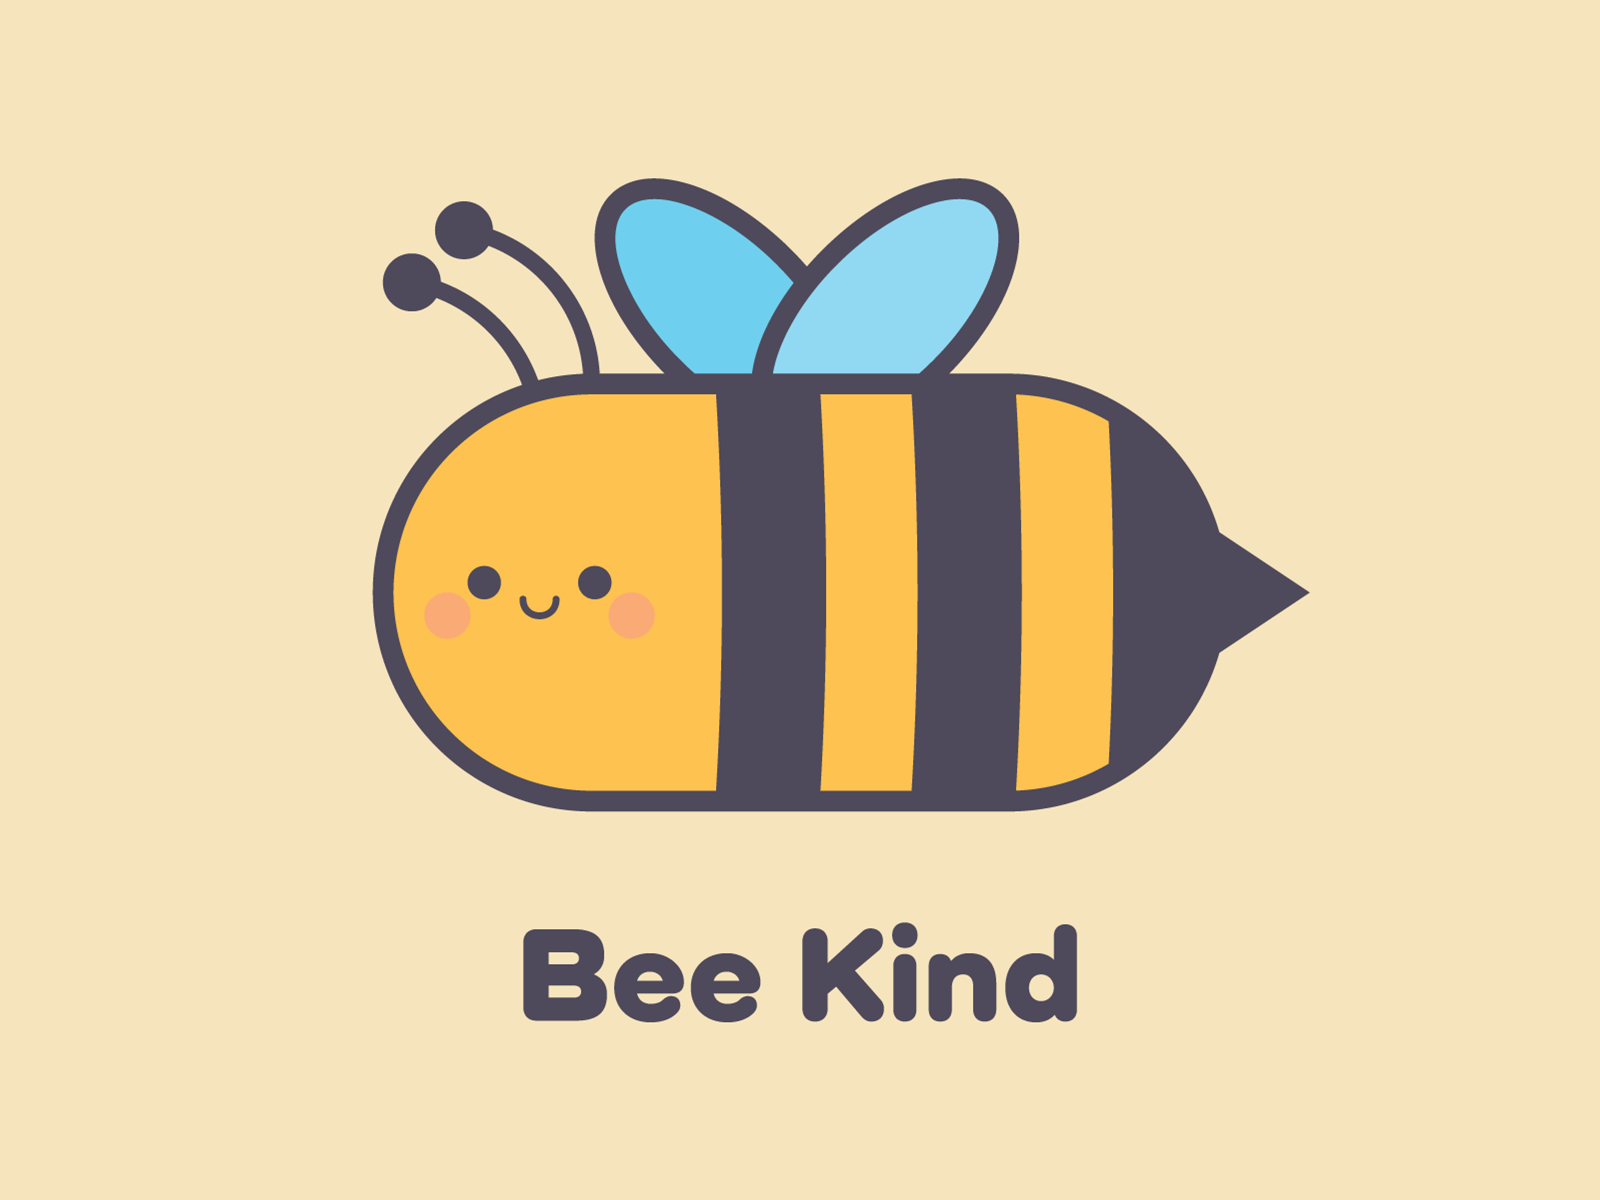 image of a cute bee and text underneath that says "Bee Kind"